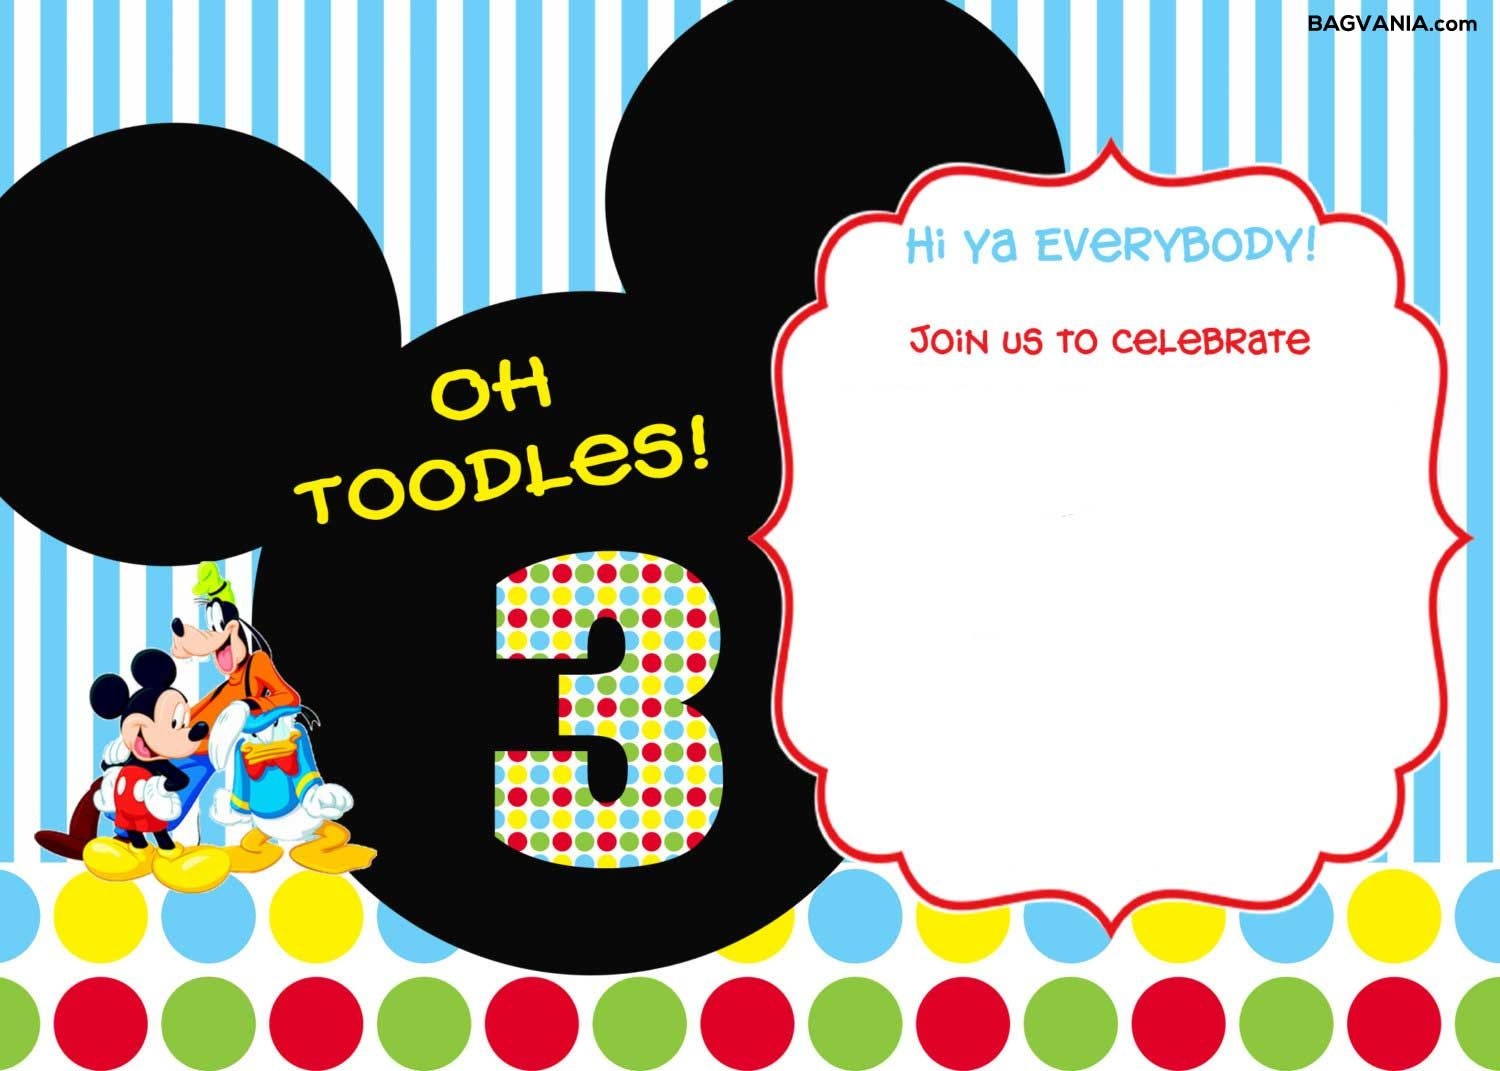 Download Free Printable Mickey Mouse Birthday Invitations | Bagvania - Free Printable Mickey Mouse Birthday Invitations